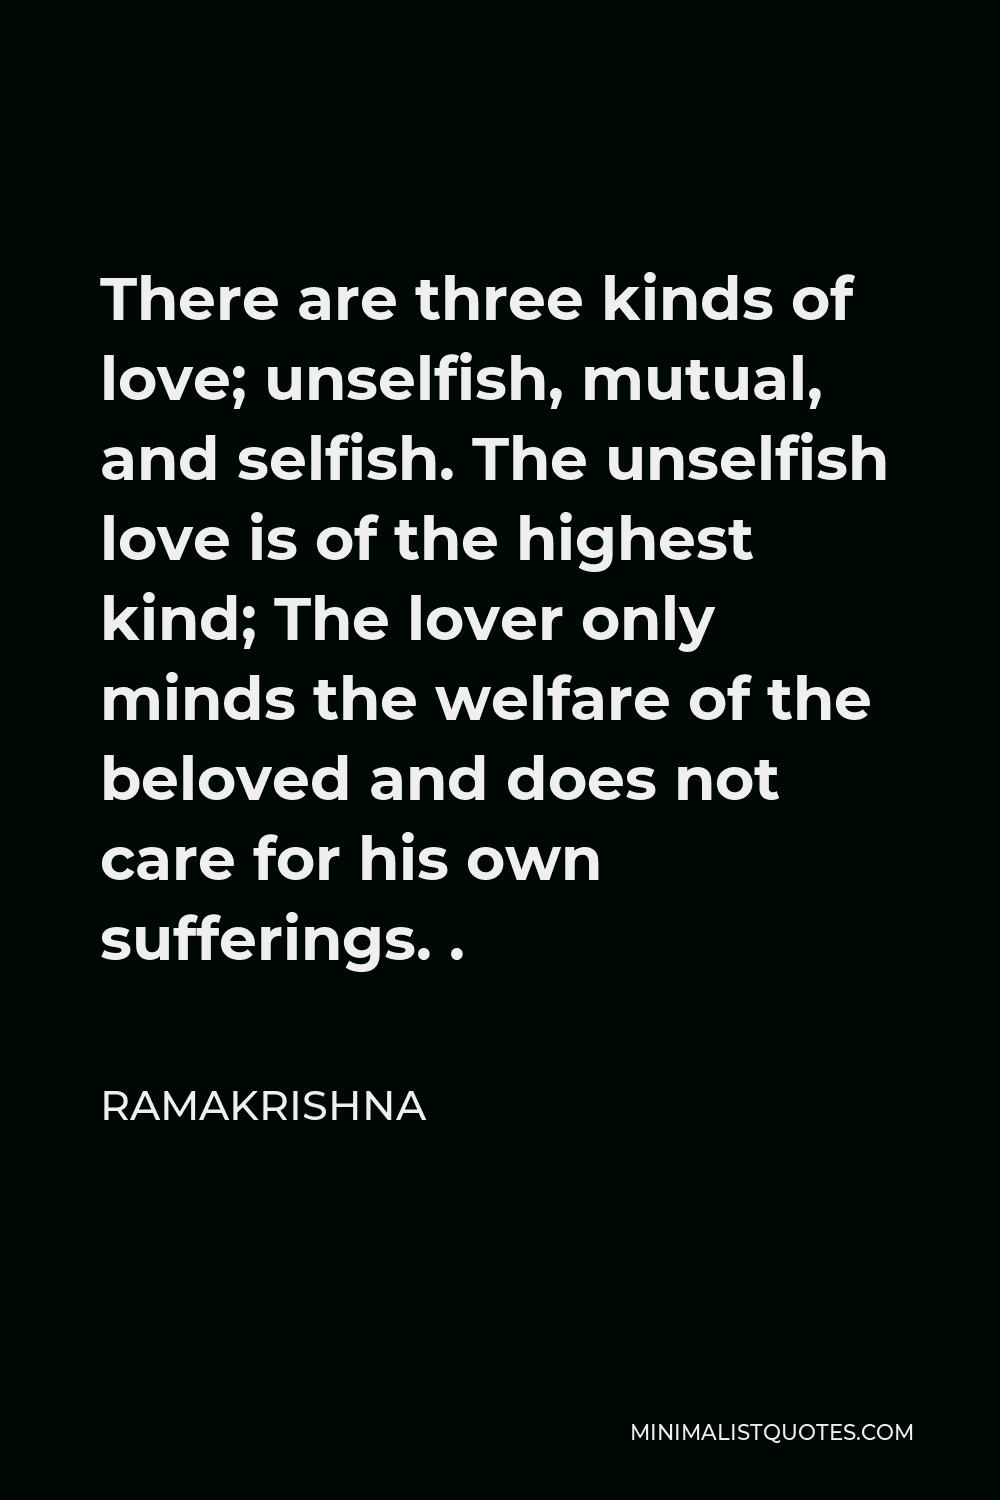 Ramakrishna Quote - There are three kinds of love; unselfish, mutual, and selfish. The unselfish love is of the highest kind; The lover only minds the welfare of the beloved and does not care for his own sufferings. .